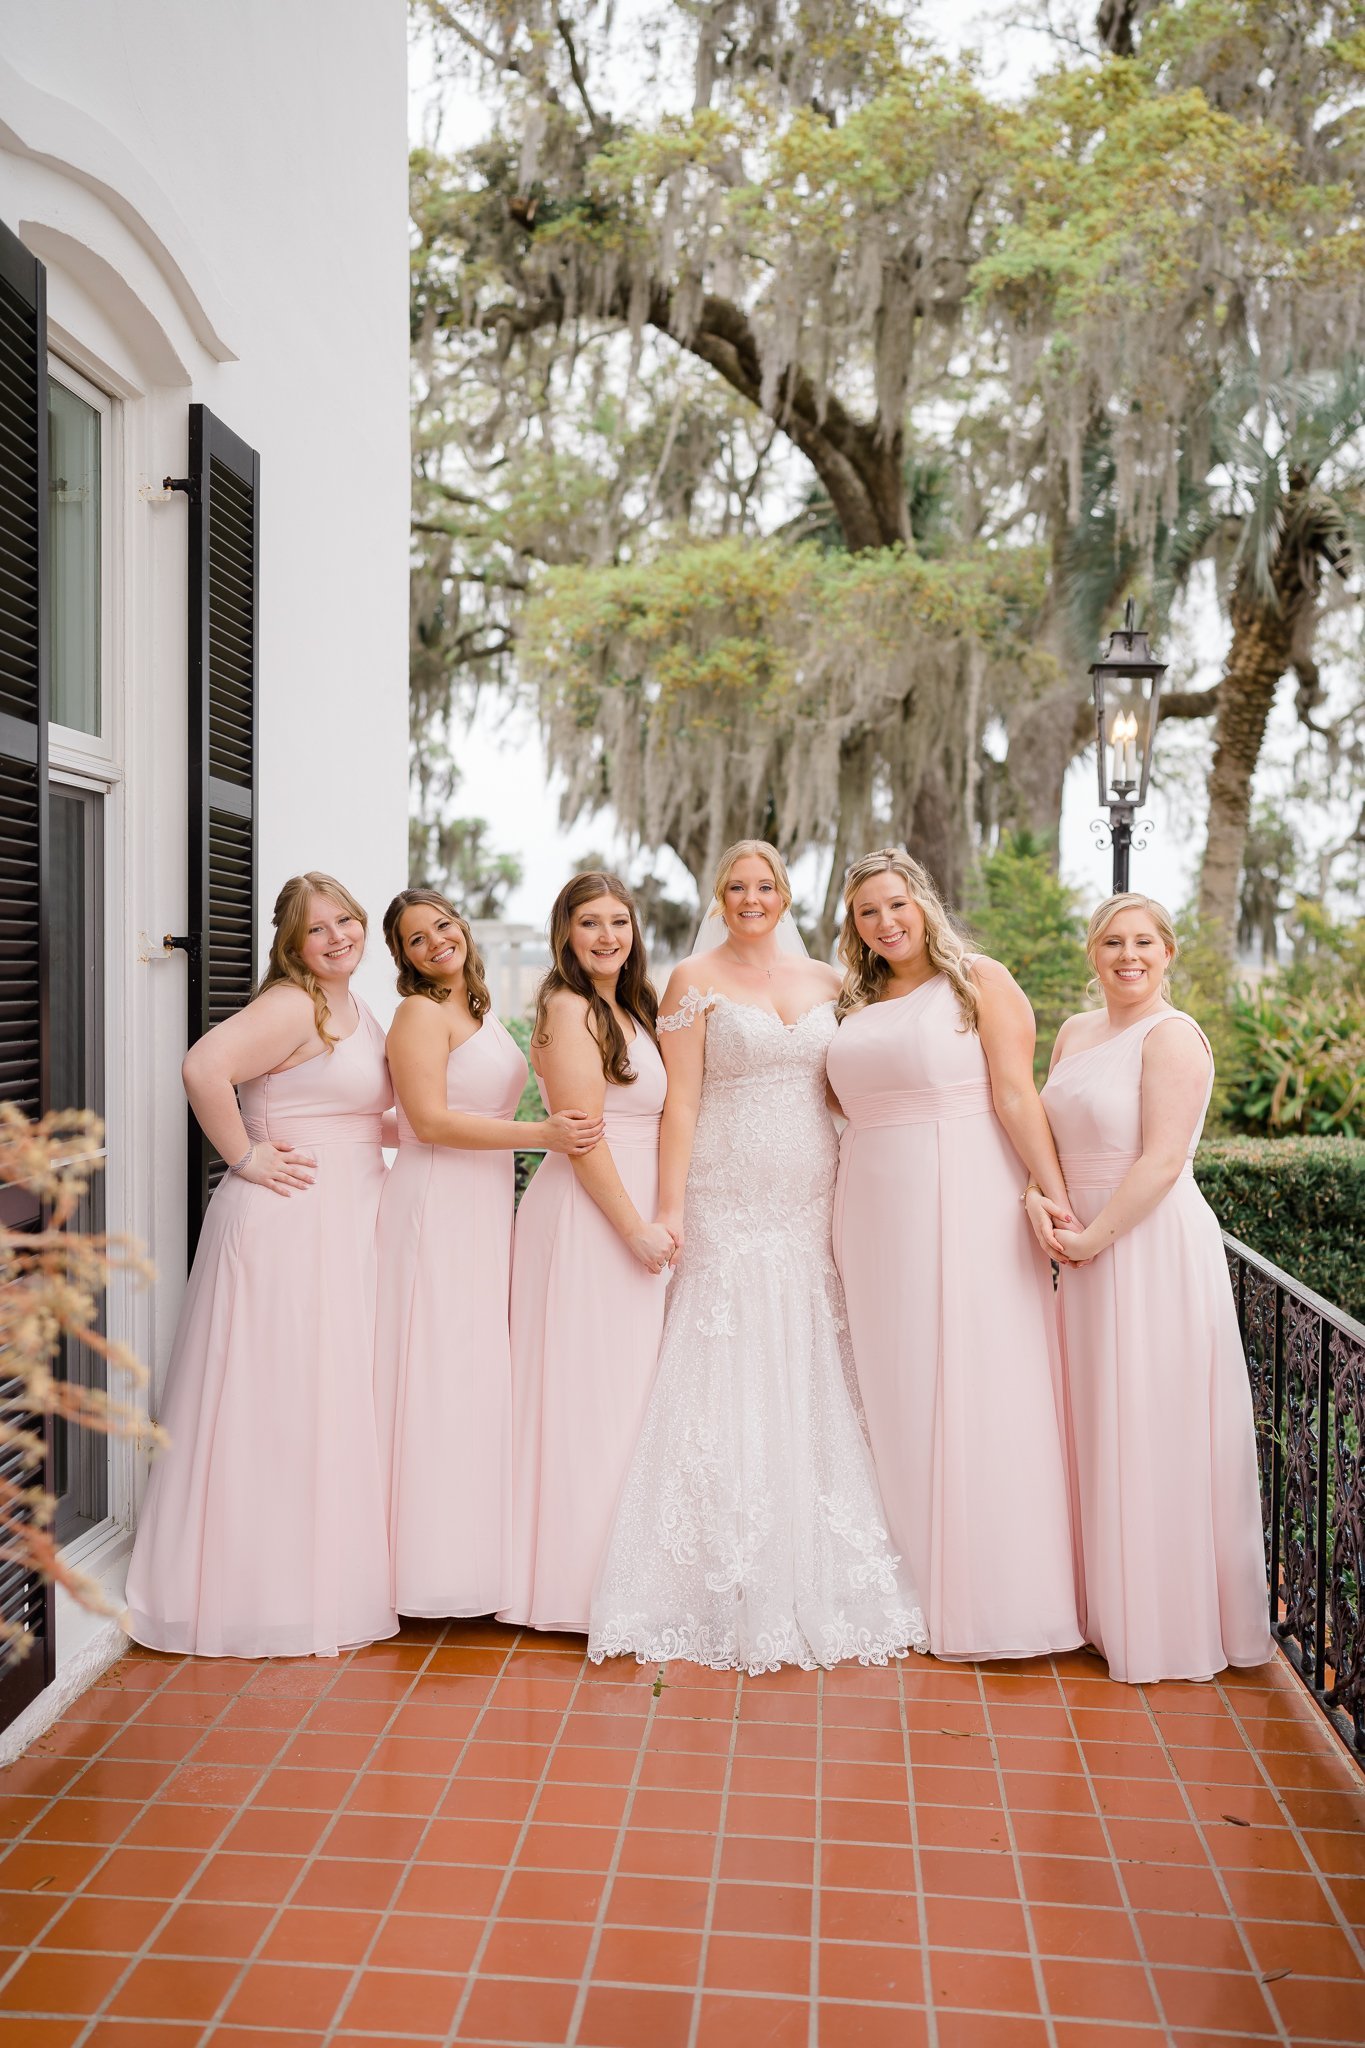 ivory-and-beau-blog-real-bride-down-for-the-gown-taylor-savannah-bride-maggie-sottero-wedding-dress-savannah-bridal-shop-savannah-bridal-boutique-mermaid-wedding-dress-savannah-georgia-EMP_LR_175.jpg